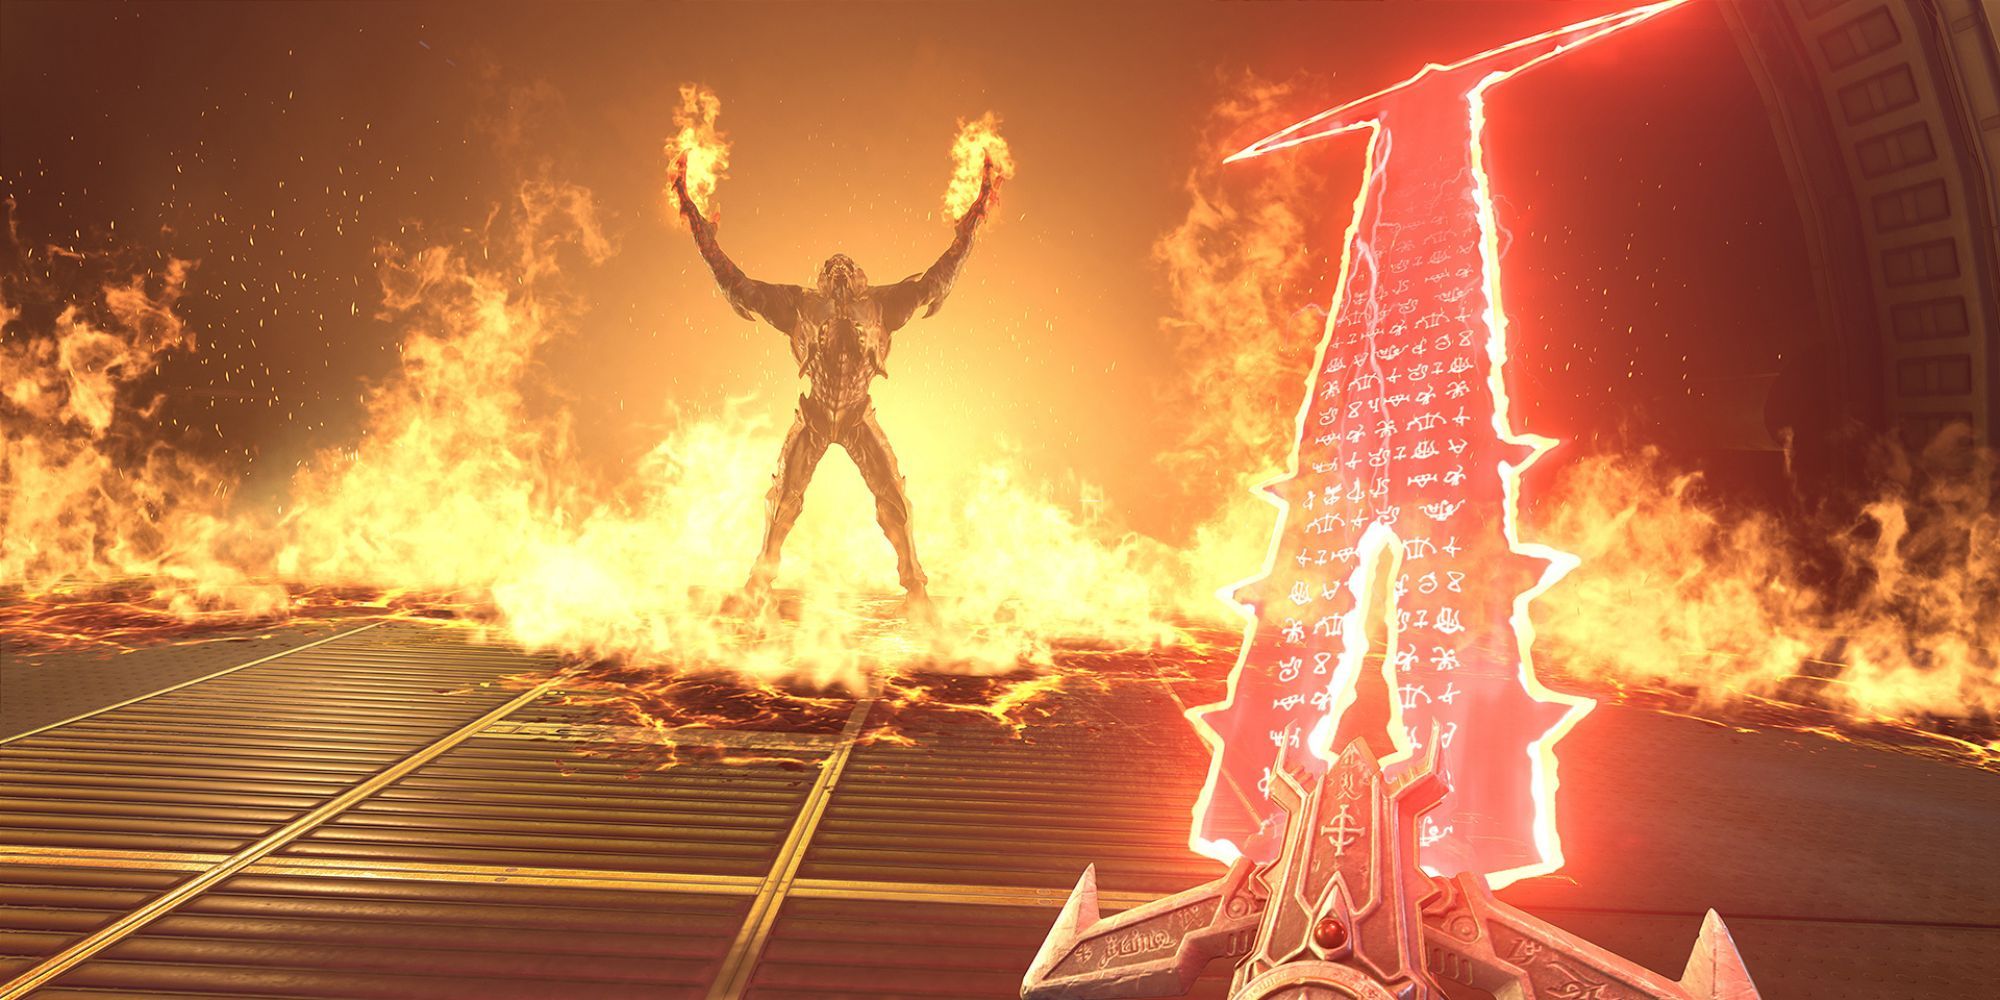 Arch-vile summons lake of fire as player approaches with the Crucible